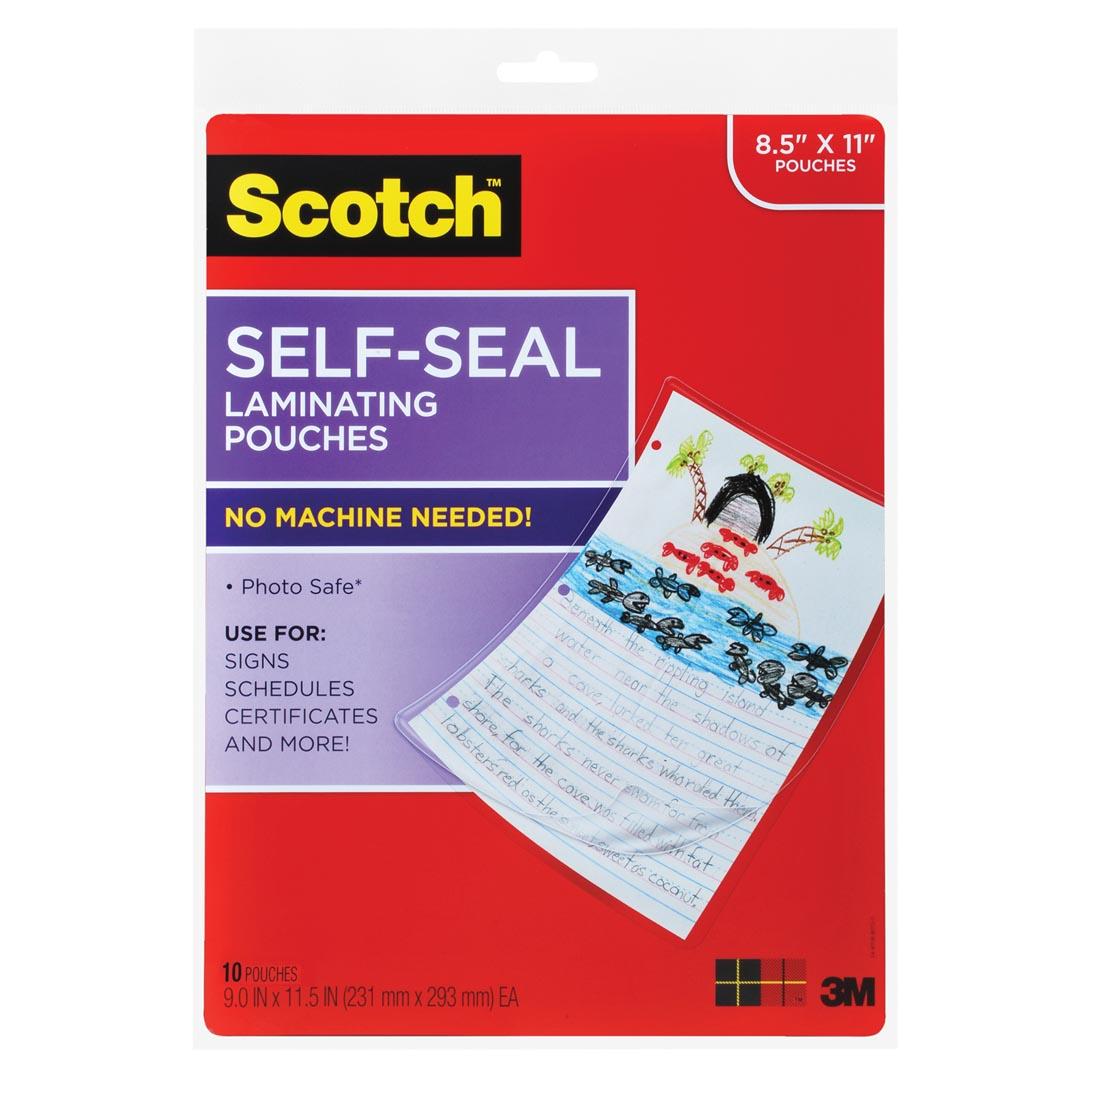 Scotch Self-Sealing Laminating Pouches, full sheets, 10-count package